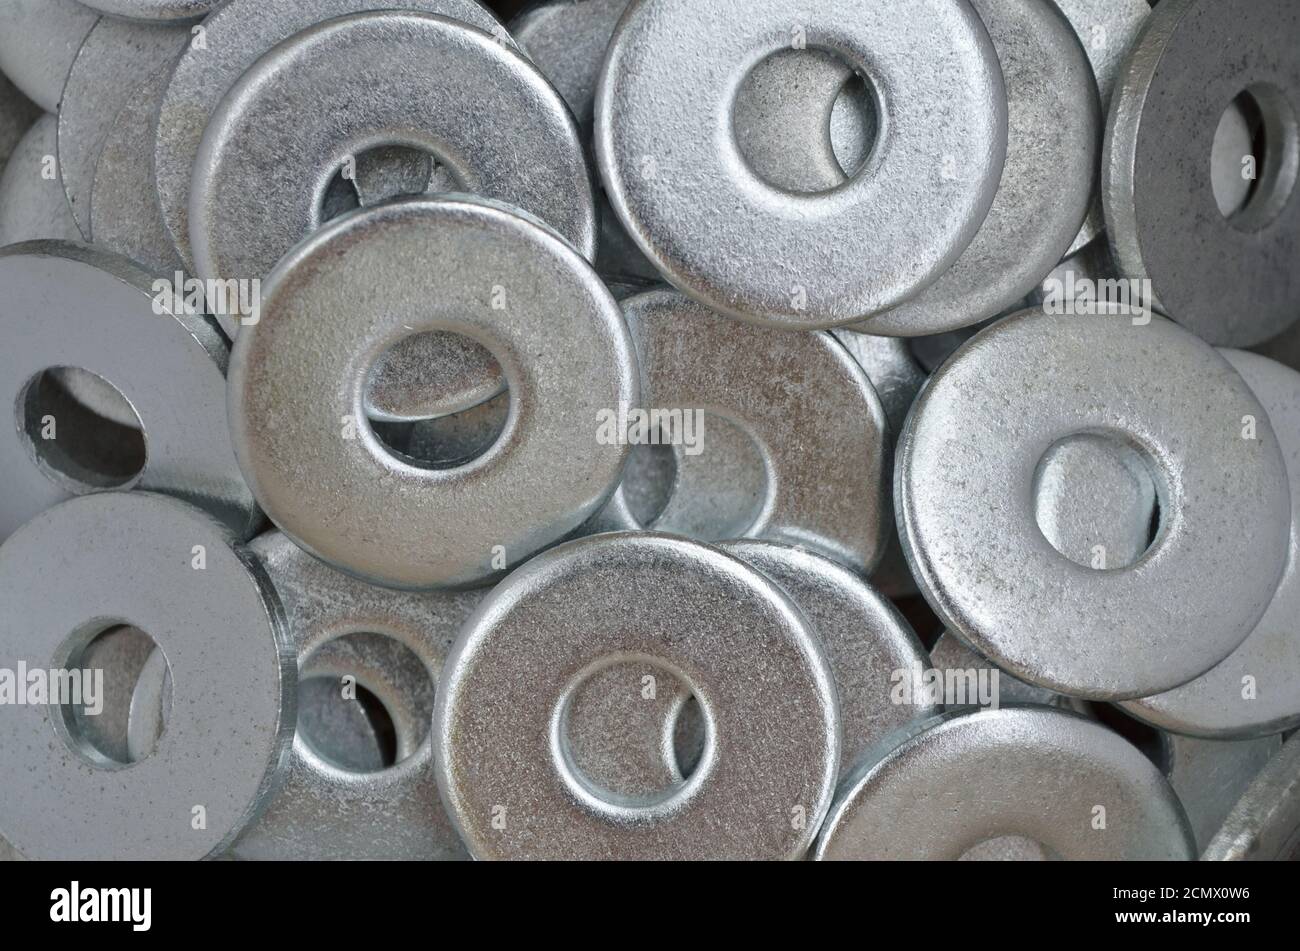 40,992 Metal Washer Images, Stock Photos, 3D objects, & Vectors